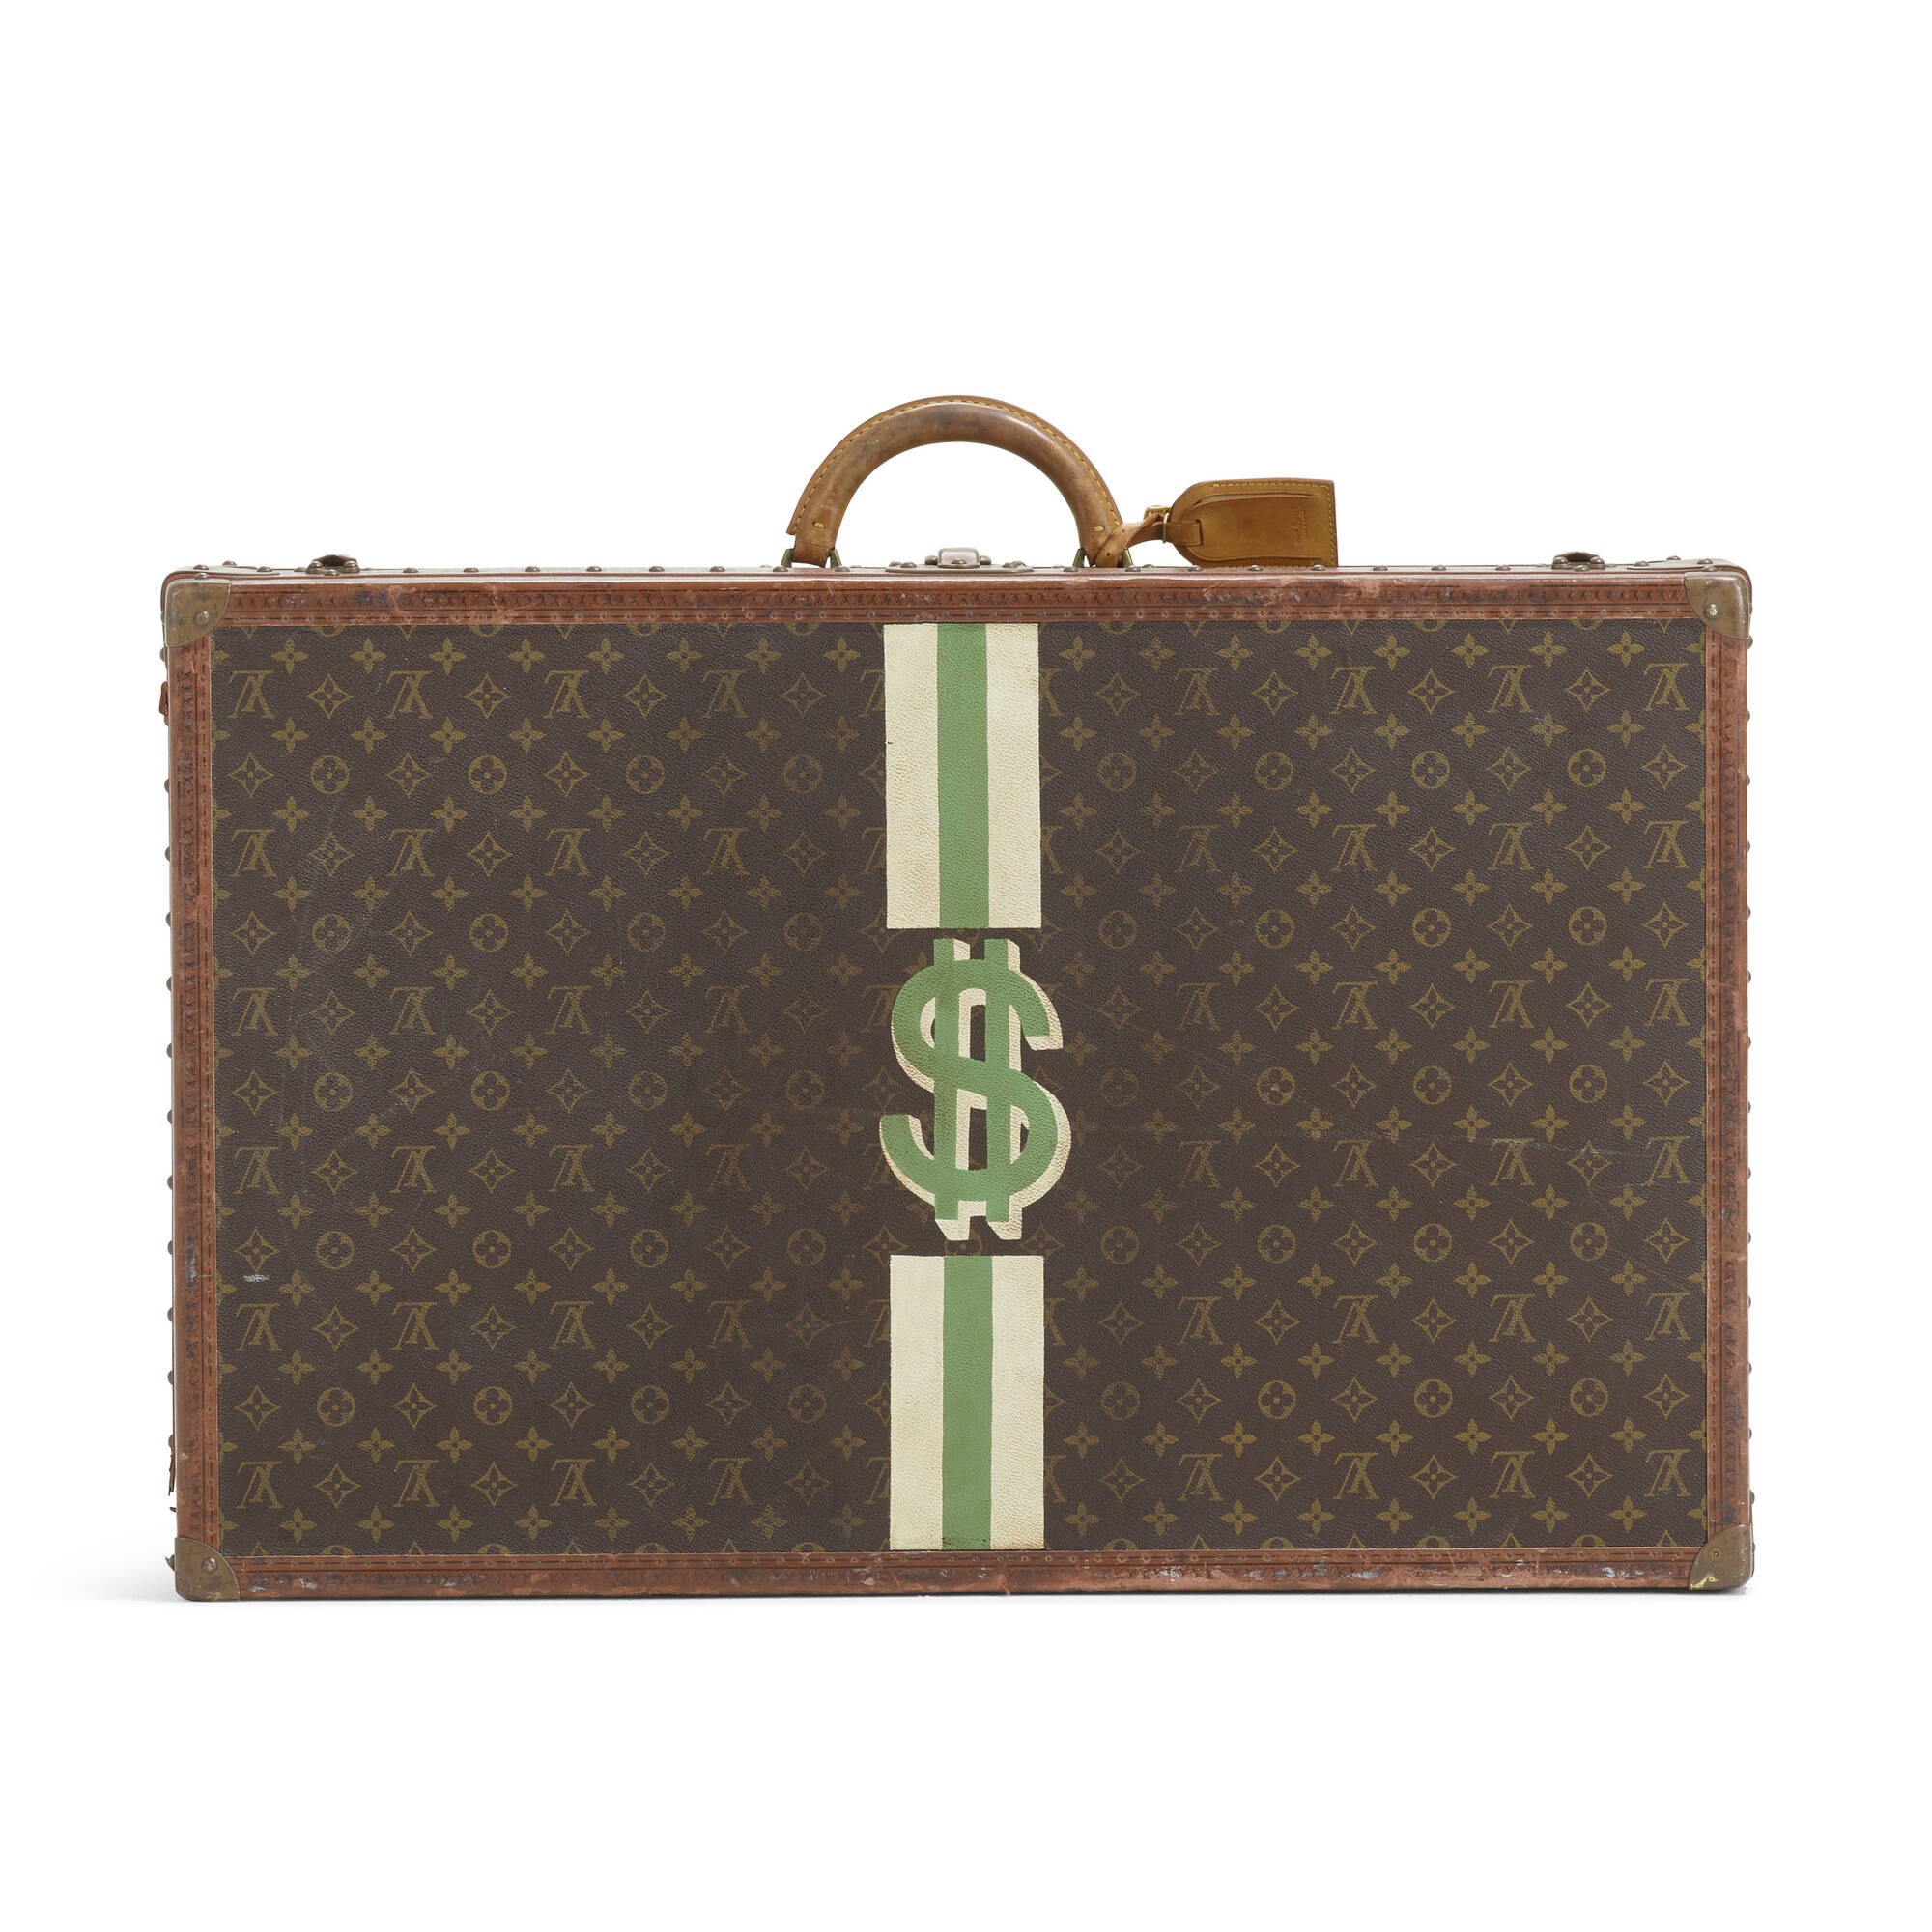 Sold at Auction: Louis Vuitton Bags & Leather Suitcases (4)